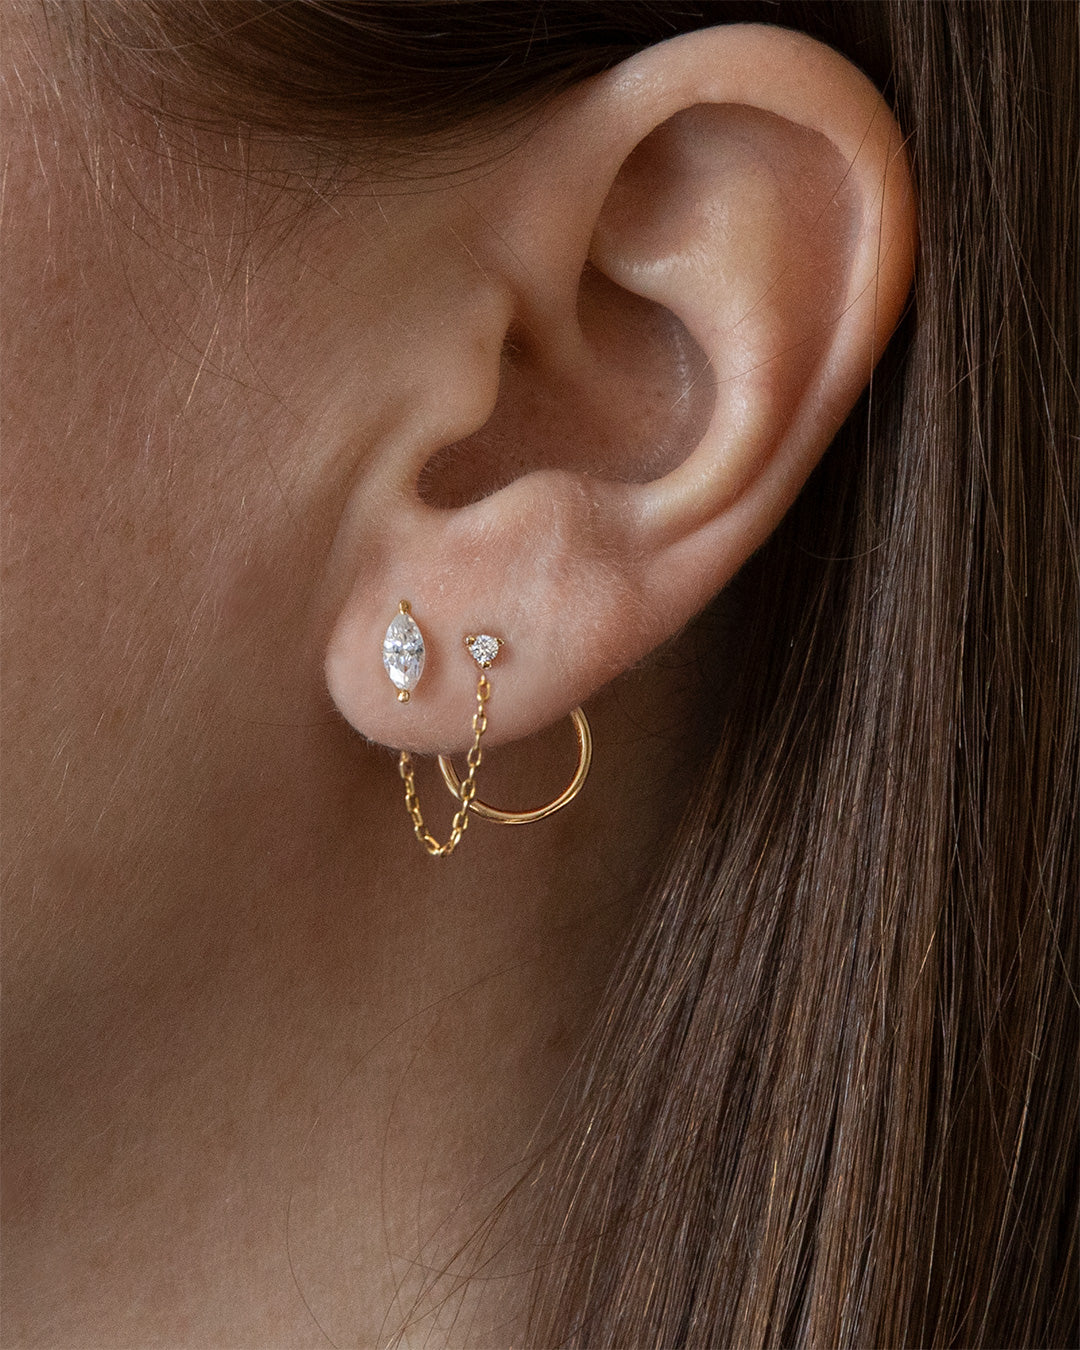 Tiny Studs | Cartilage Piercings- Helix, Daith, Tragus – AMYO Jewelry